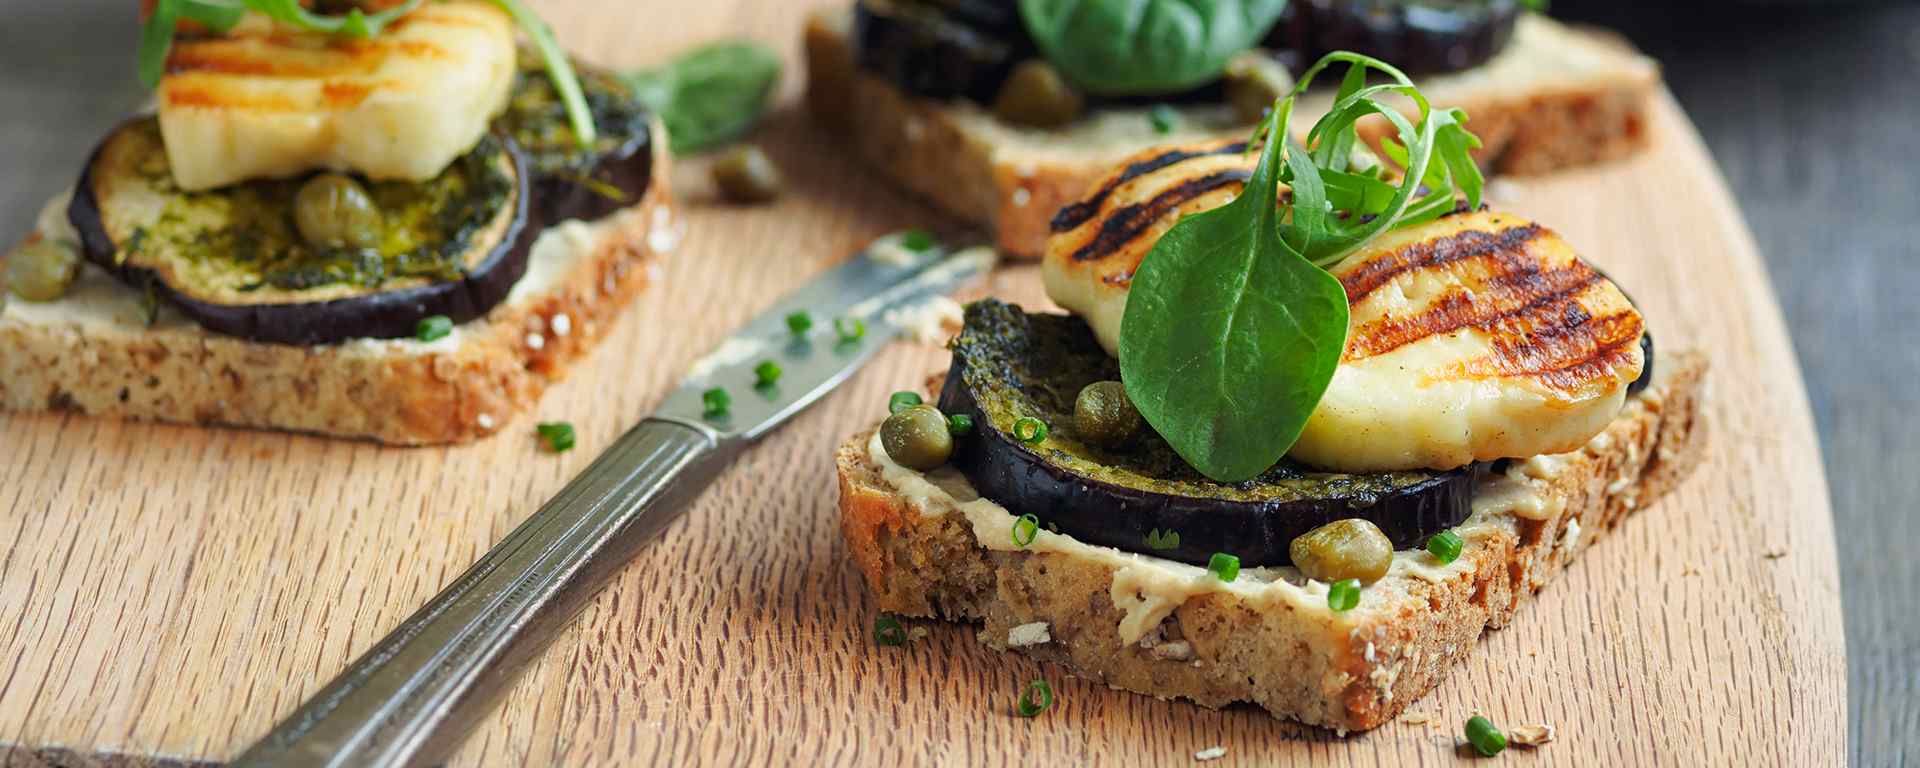 Photo for - Roasted Vegetable Tartine with Arugula Pesto and Grilled Halloumi